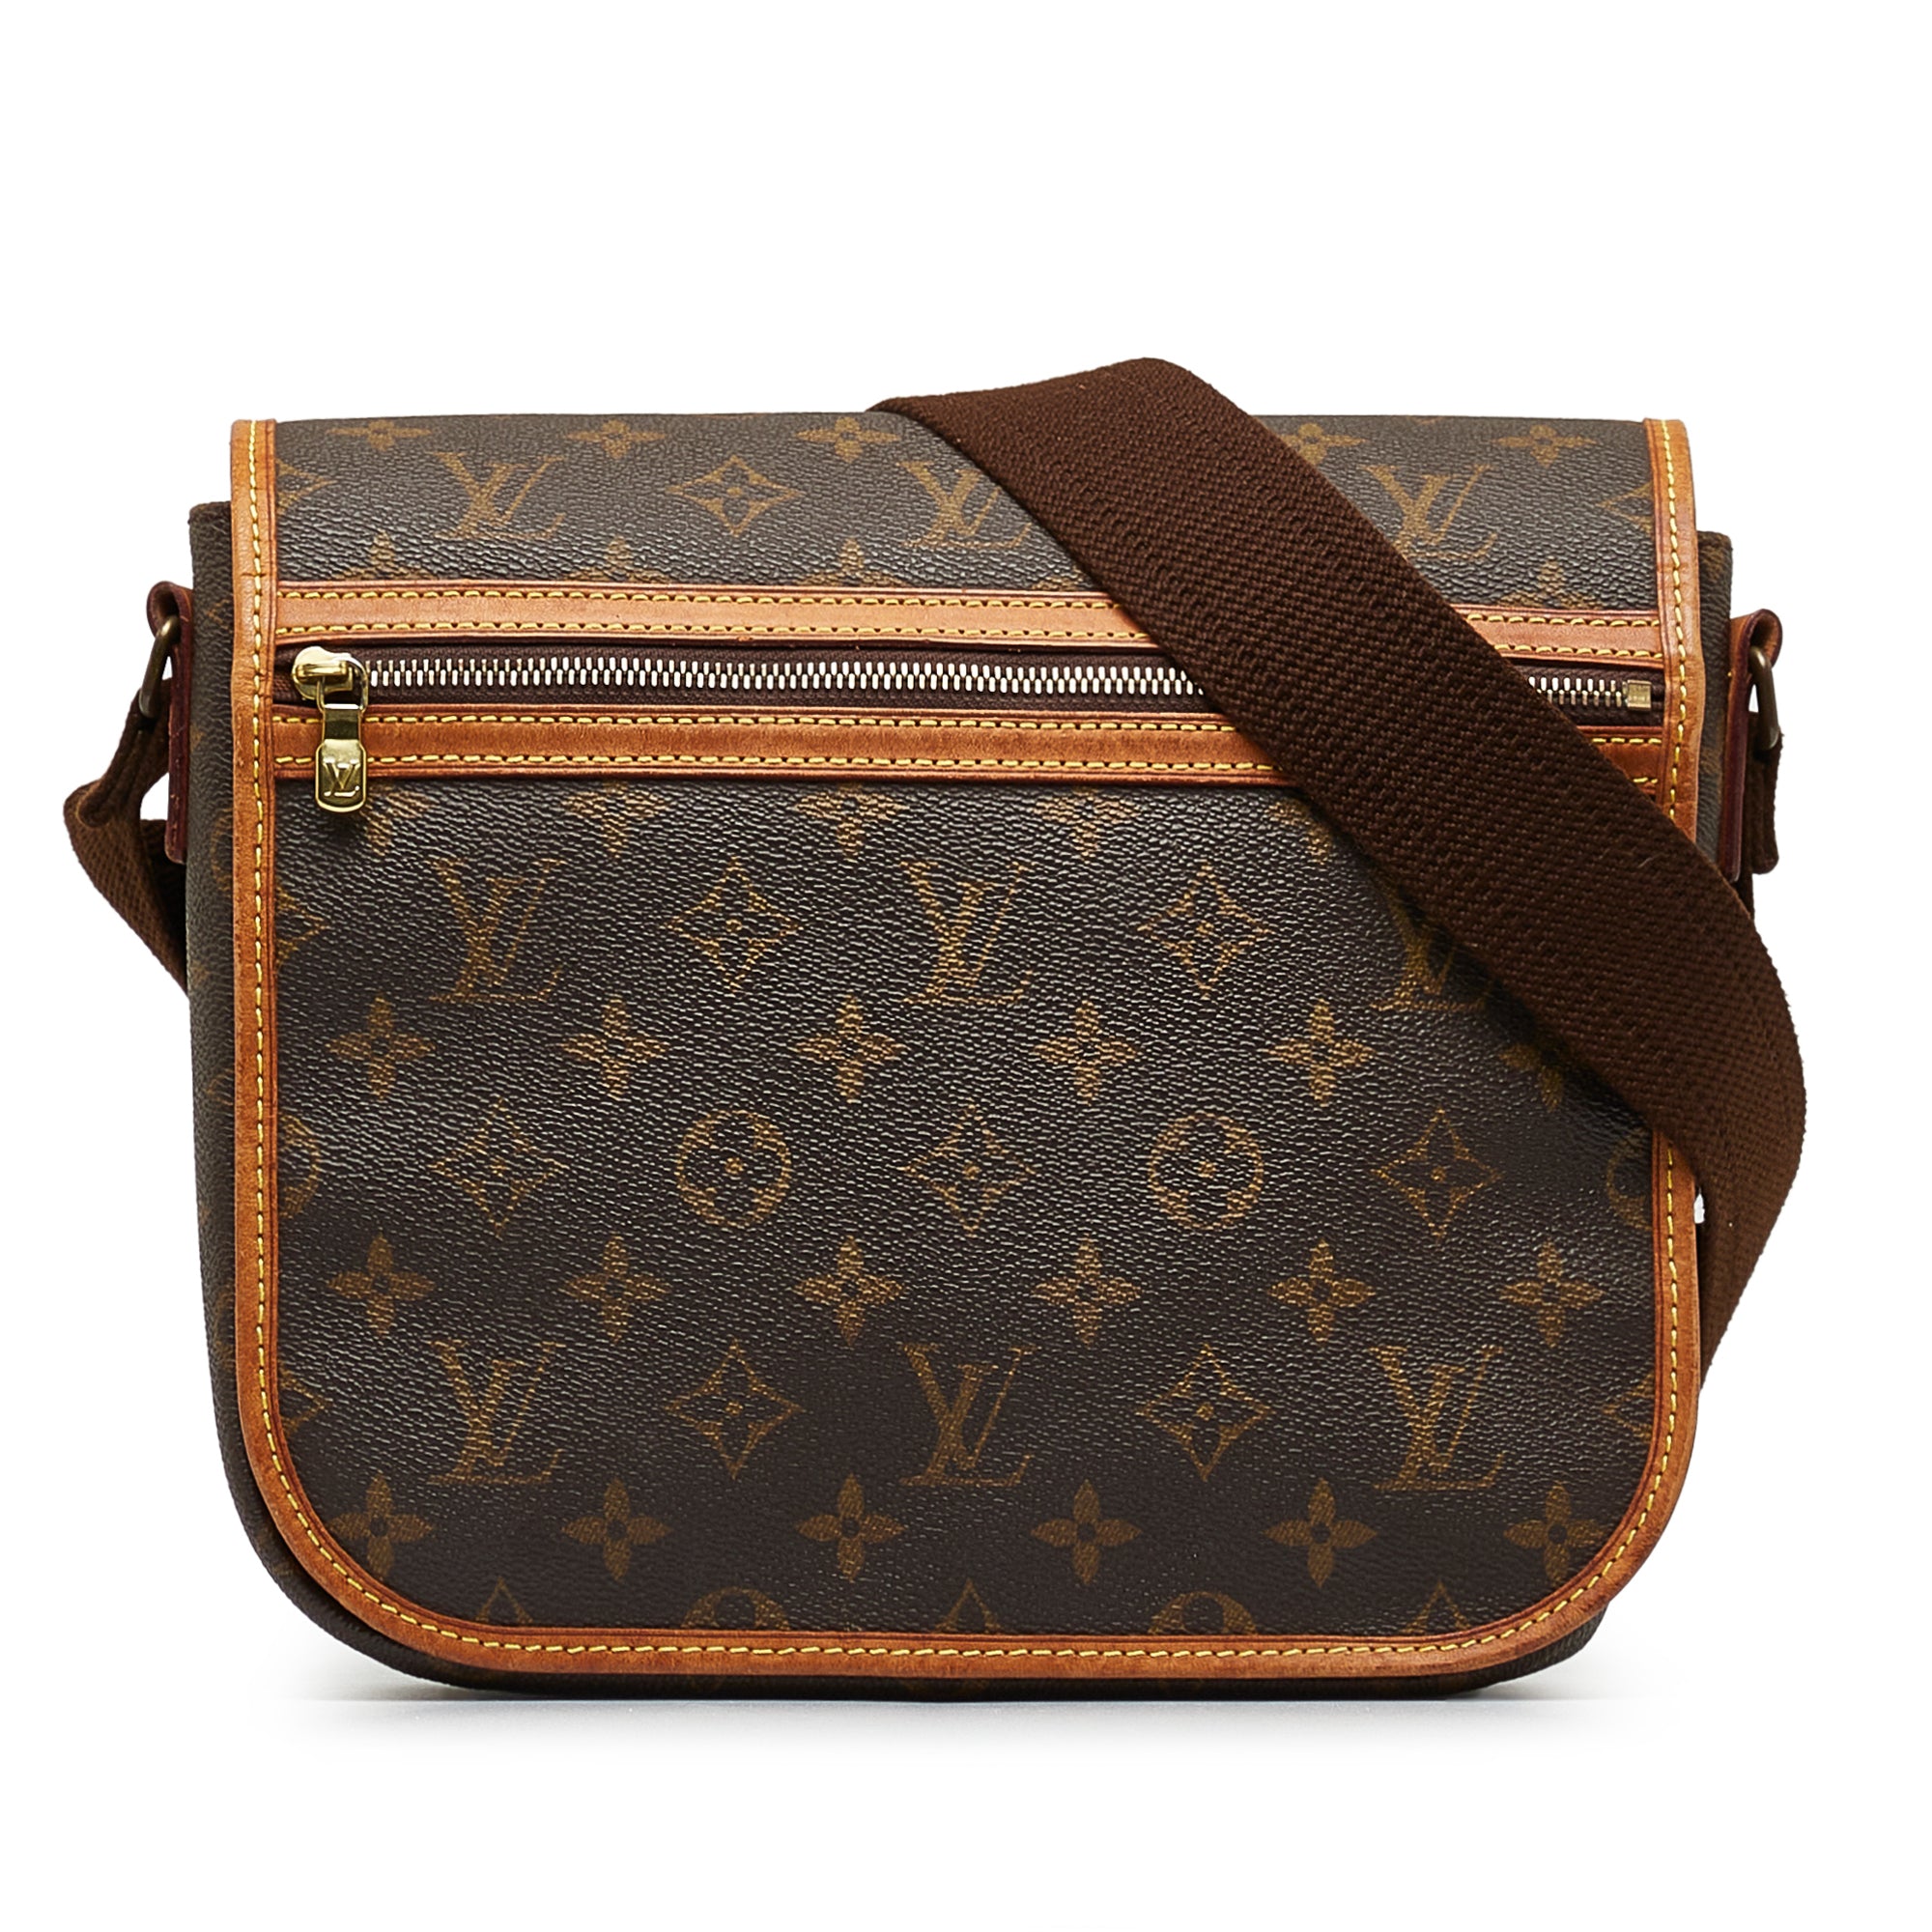 Louis Vuitton - Authenticated Bosphore Handbag - Cloth Brown for Women, Very Good Condition